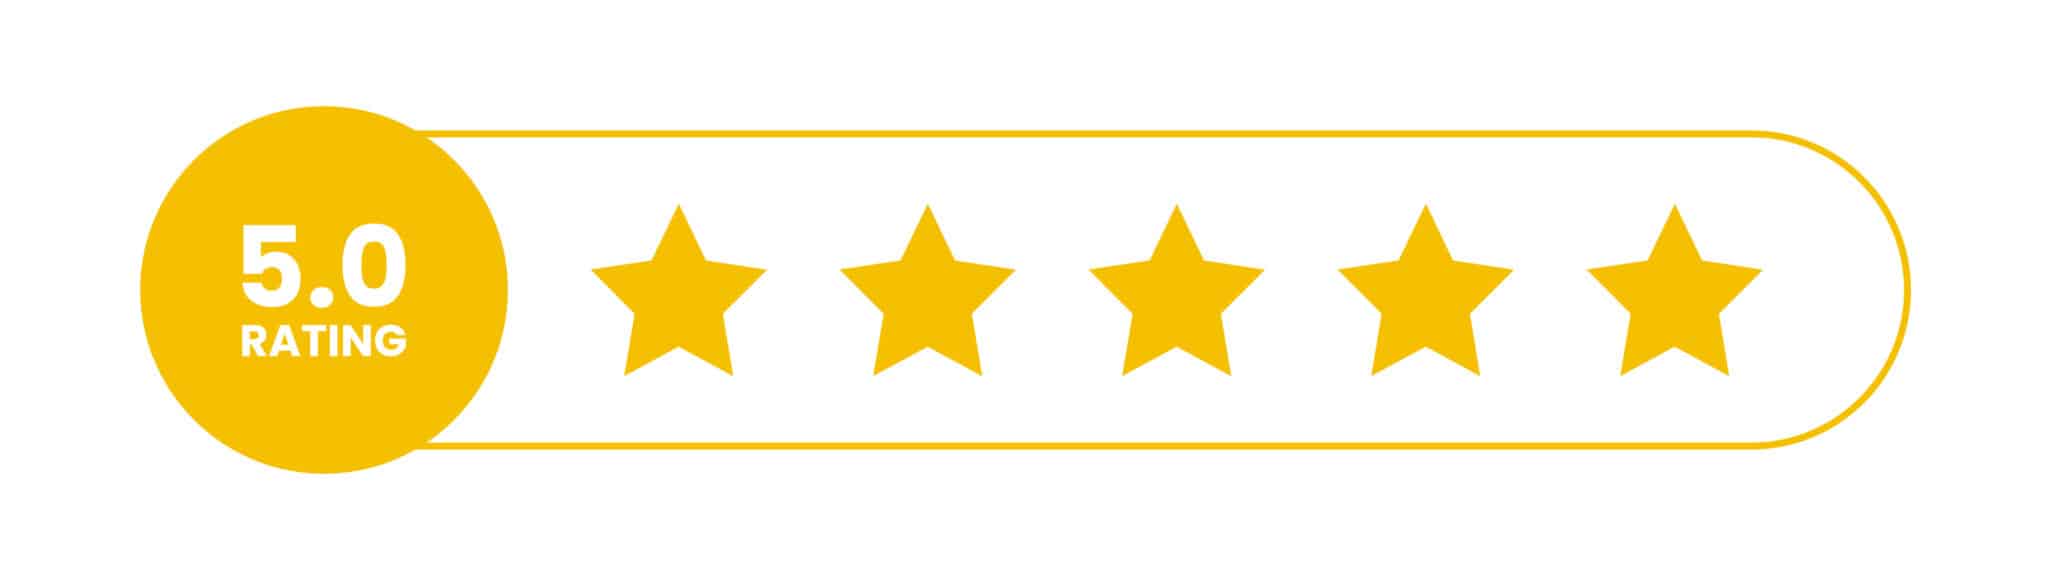 Five gold stars representing 5-star rating for Athreon's exceptional medical transcription service.